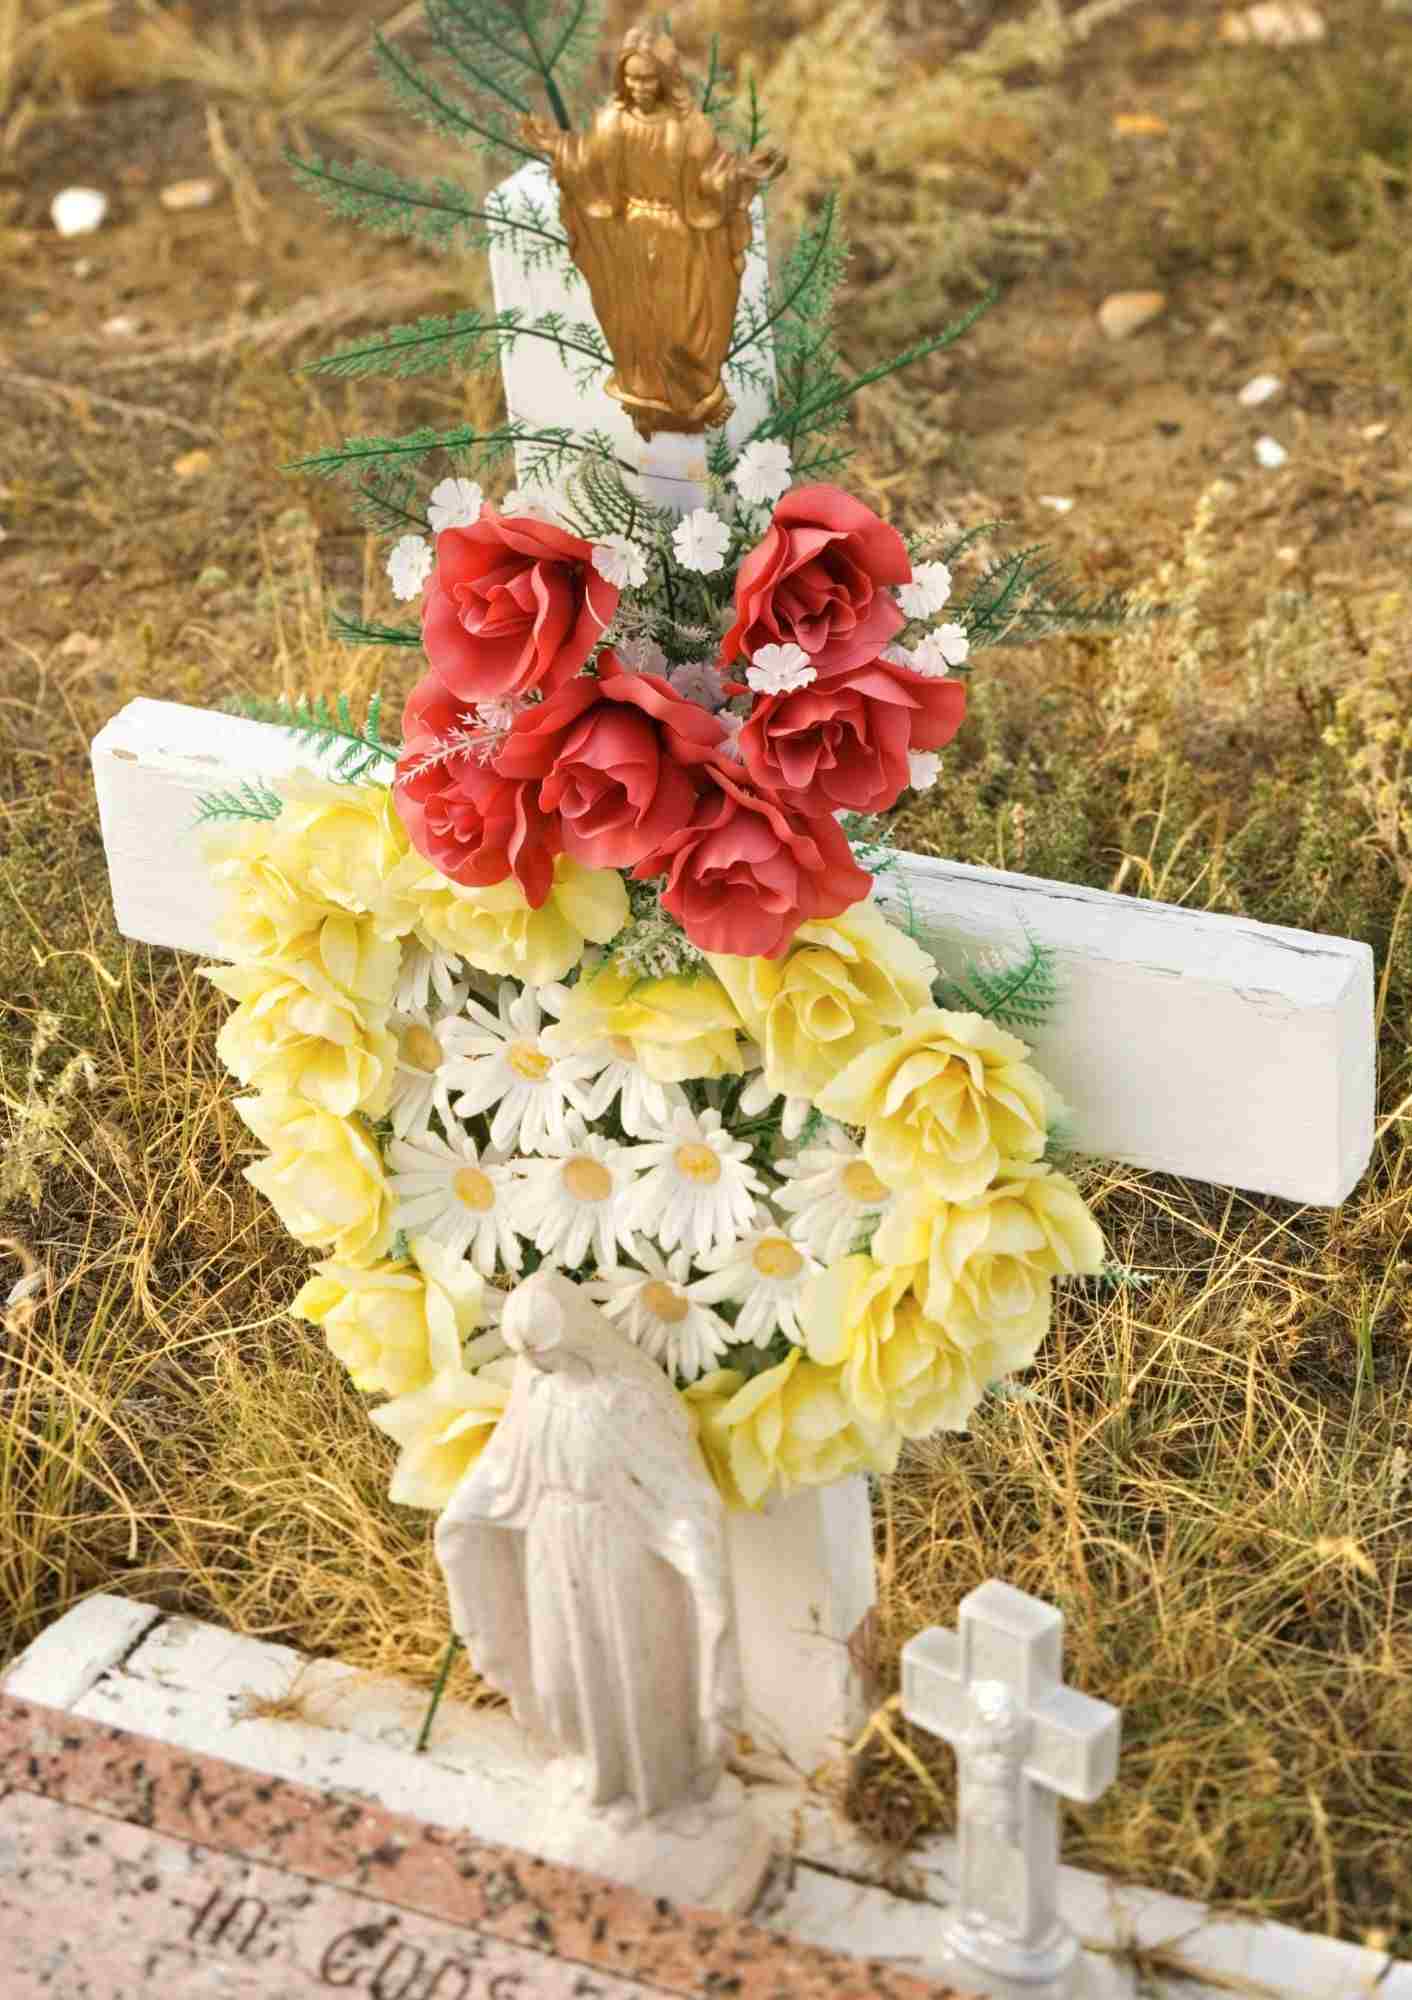 Gravesite decorated with red and yellow flowers.